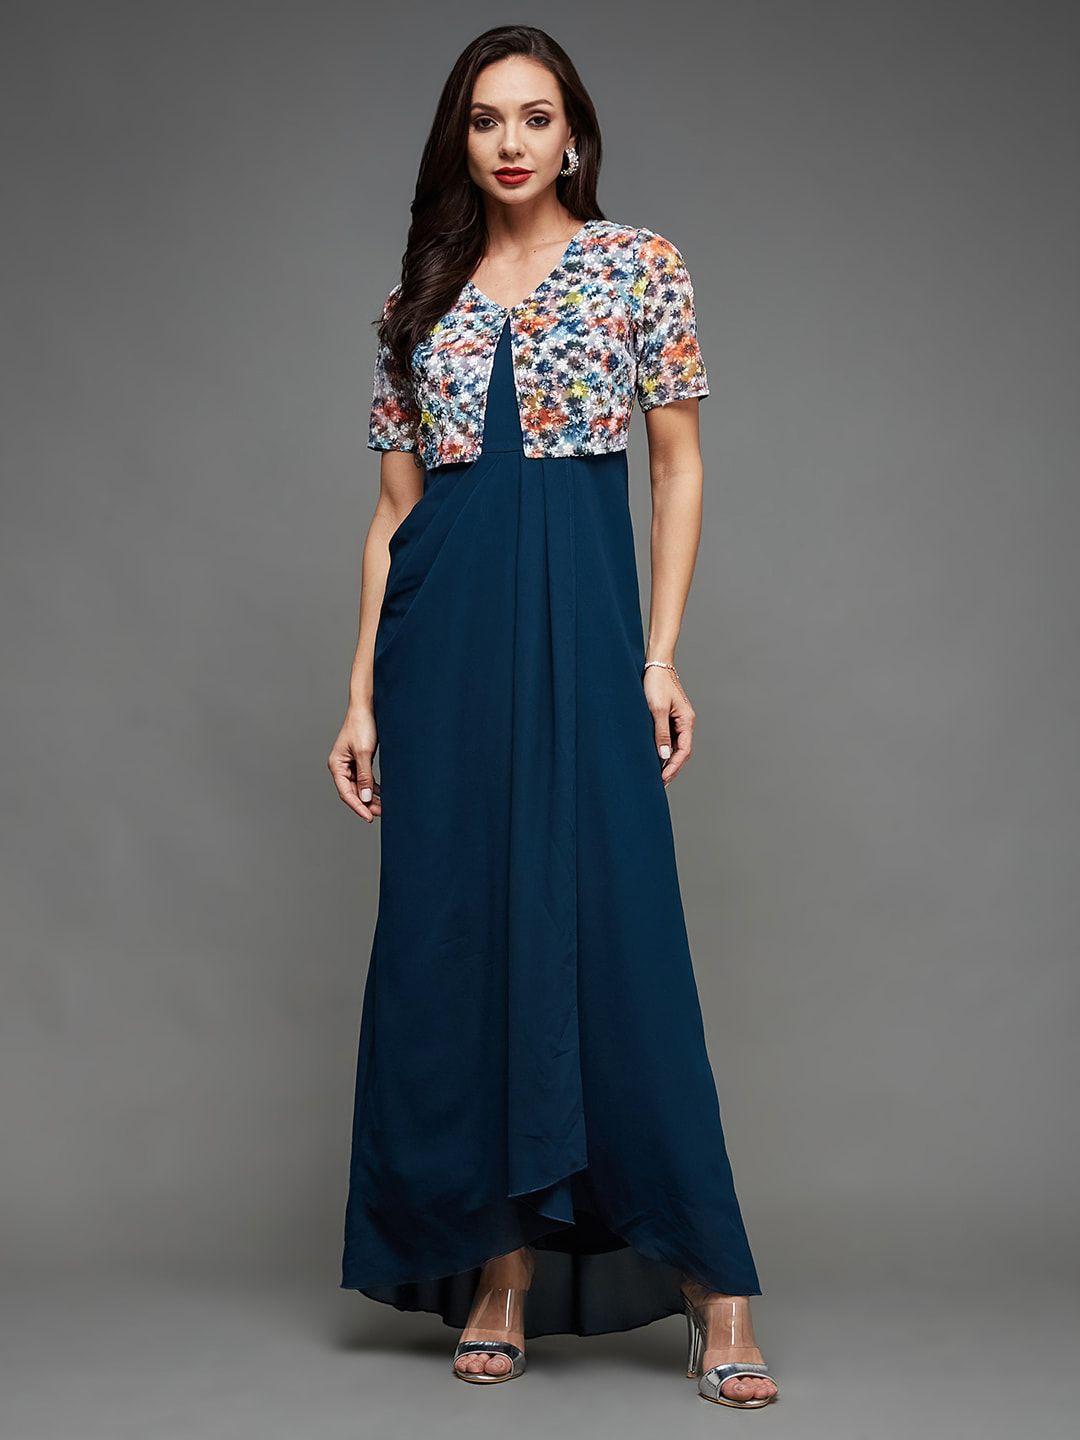 miss-chase-teal-georgette-maxi-dress